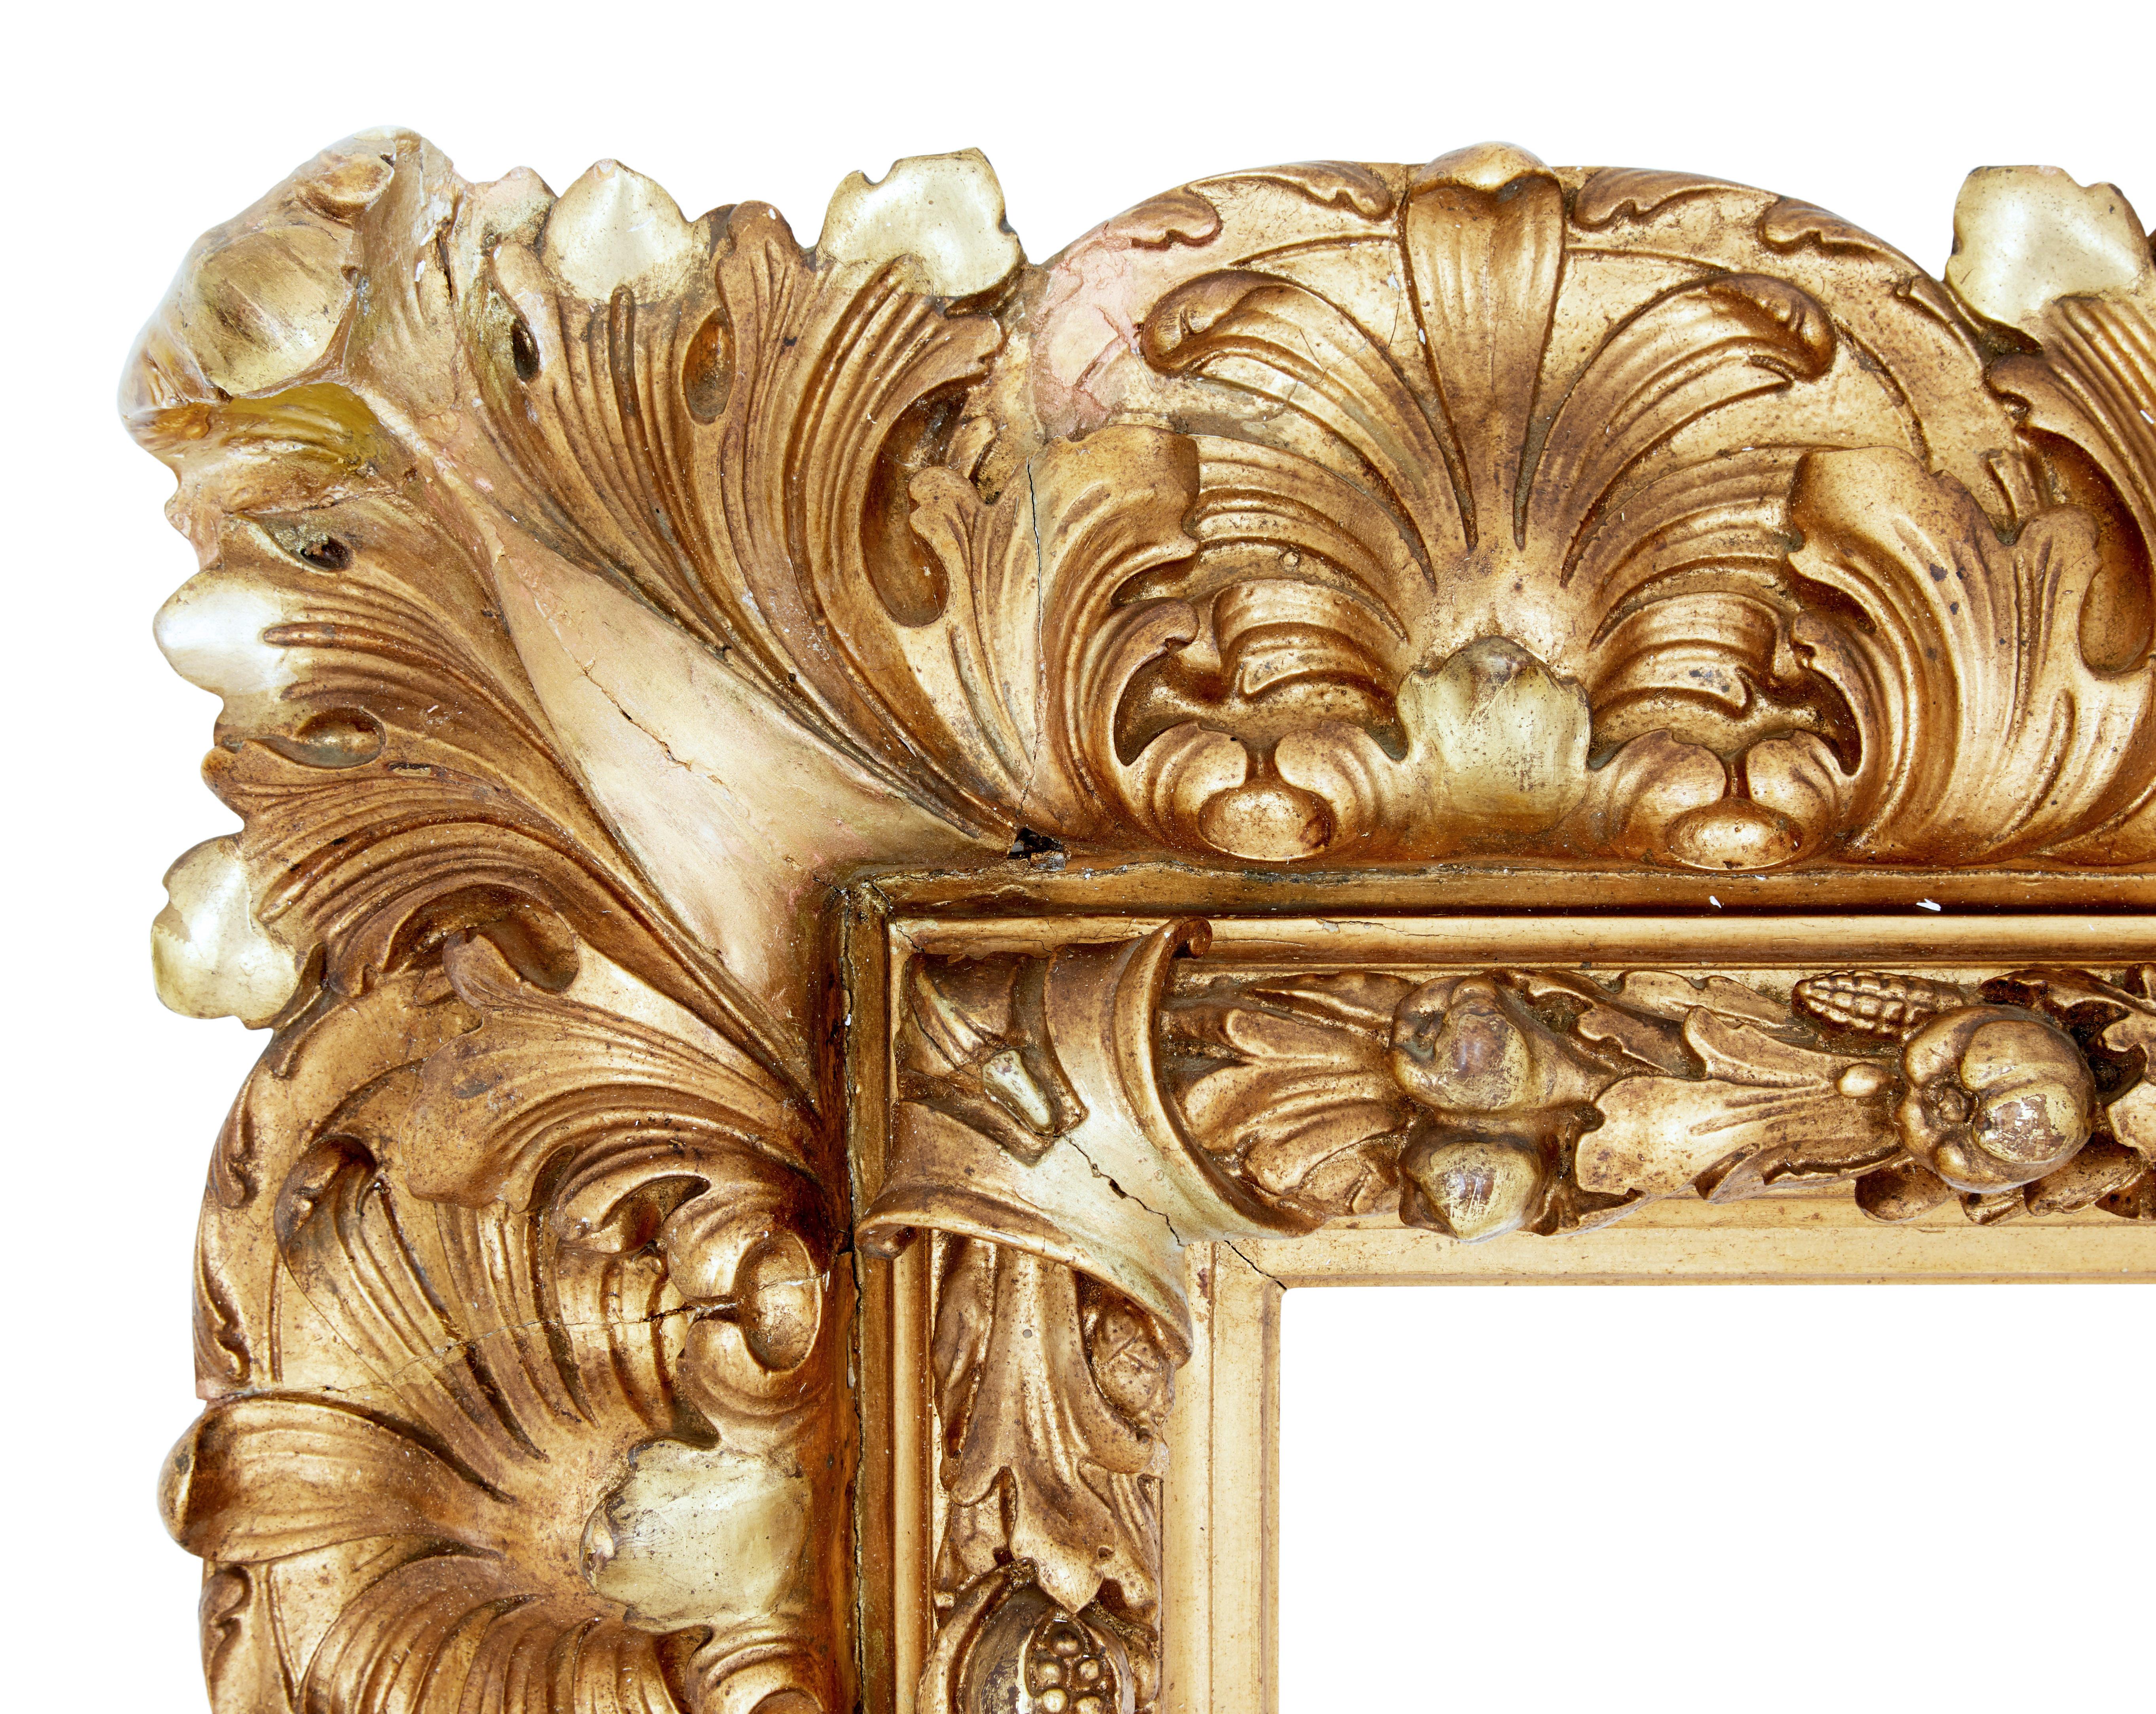 Large impressive 19th century Rococo revival gilt frame, circa 1890

Great opportunity to turn this decorative frame into a fantastic wall decoration. Inner slip with carved pods and leaves surrounded by scrolling leaves on the